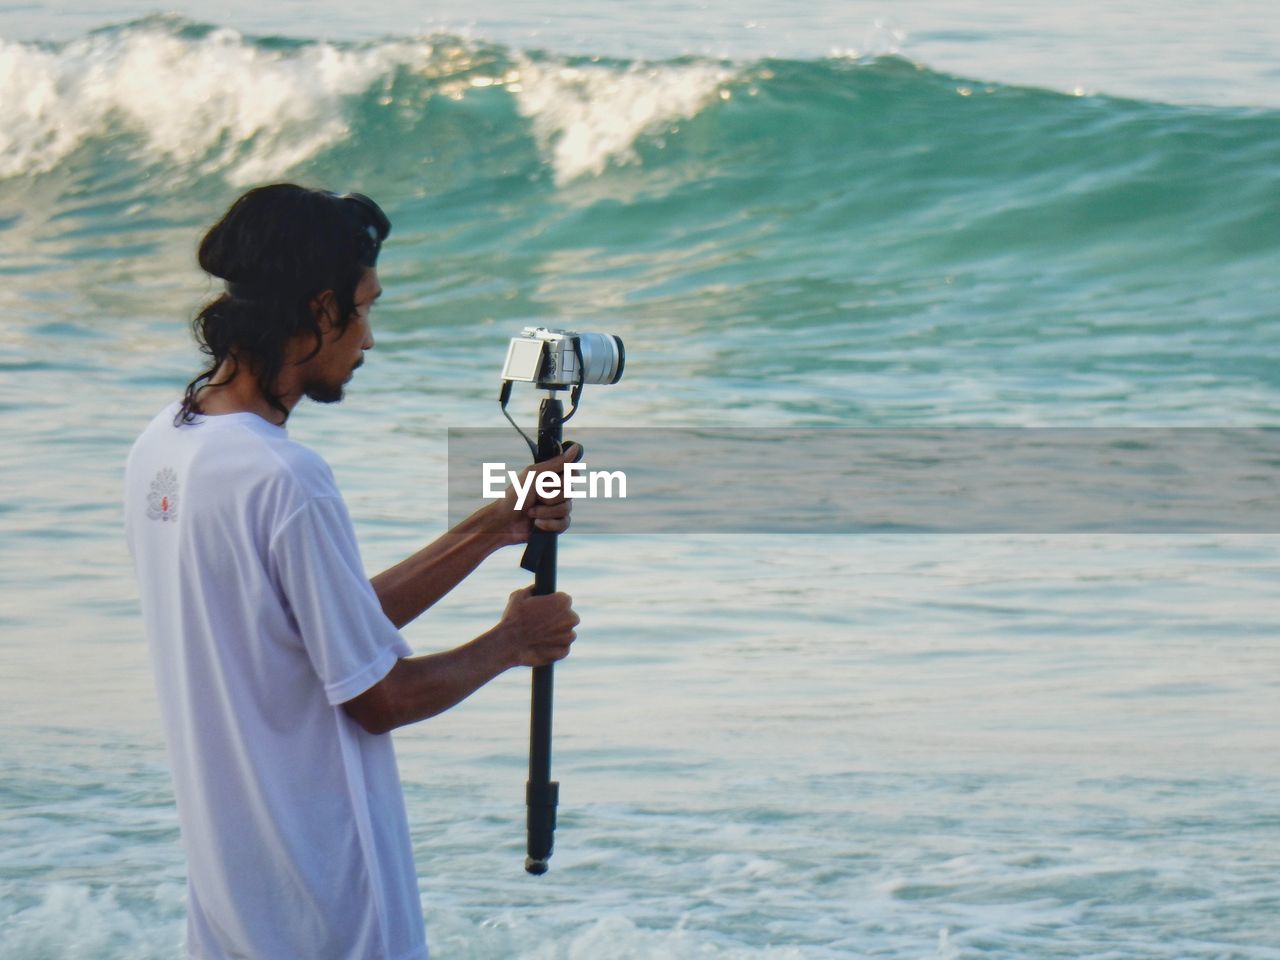 Young man photographing with camera on monopod while standing at seashore